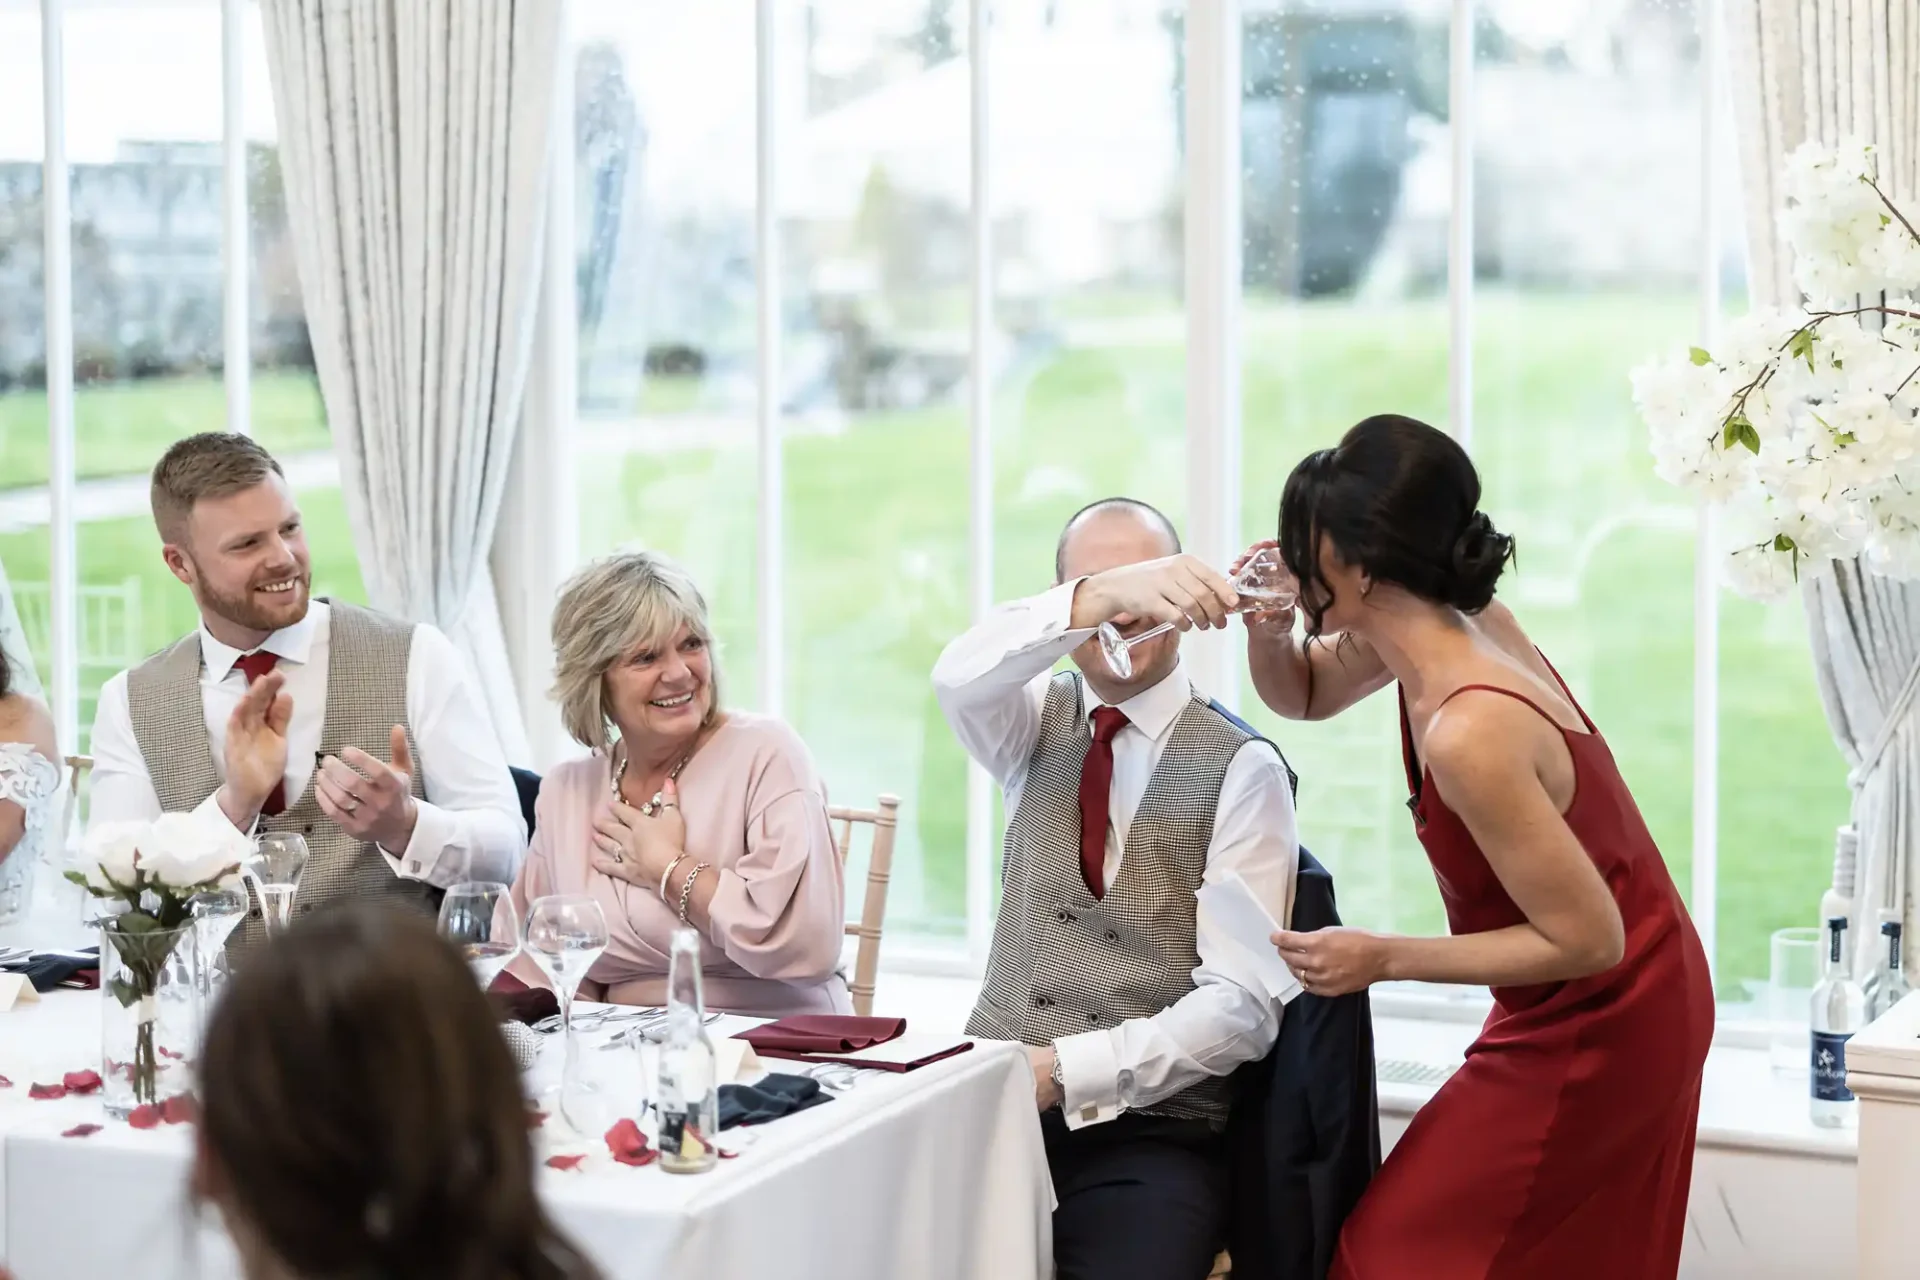 Woman in a red dress playfully covering a man's eyes at a wedding reception table while others laugh.